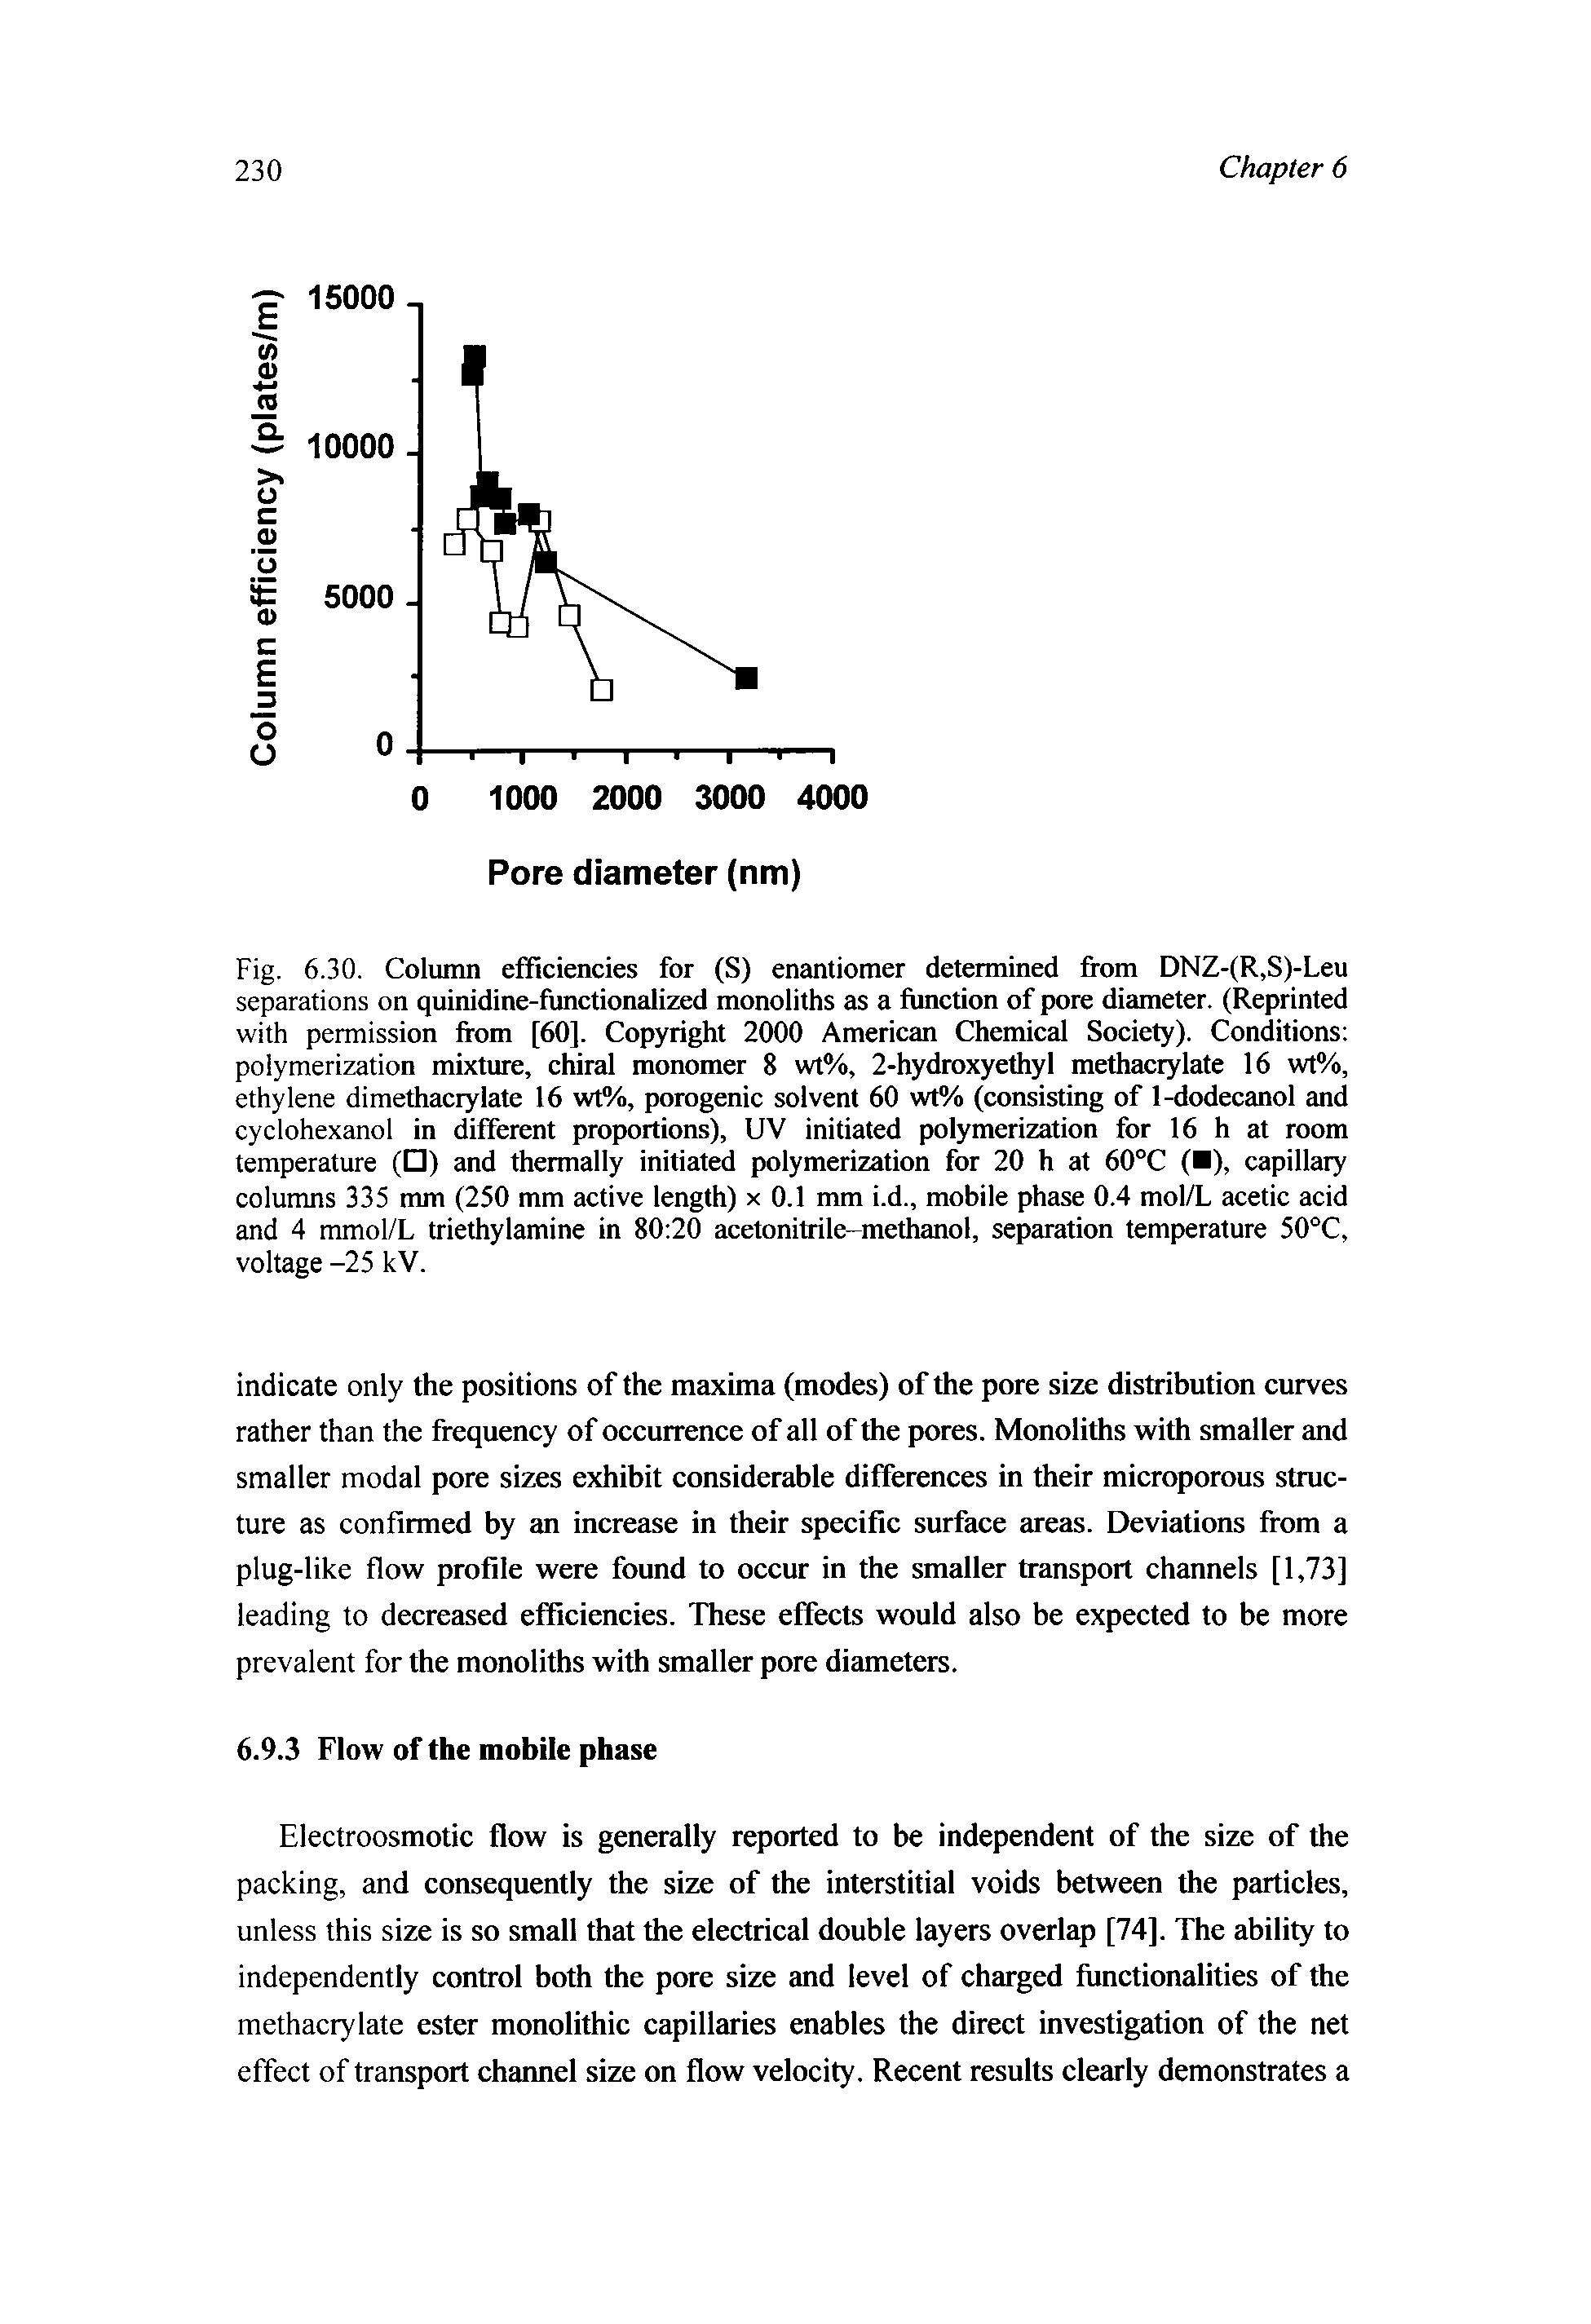 Fig. 6.30. Column efficiencies for (S) enantiomer determined from DNZ-(R,S)-Leu separations on quinidine-functionalized monoliths as a function of pore diameter. (Reprinted with permission from [60]. Copyright 2000 American Chemical Society). Conditions polymerization mixture, chiral monomer 8 wt%, 2-hydroxyethyl methacrylate 16 wt%, ethylene dimethacrylate 16 wt%, porogenic solvent 60 wt% (consisting of 1-dodecanol and cyclohexanol in different proportions), UV initiated polymerization for 16 h at room temperature ( ) and thermally initiated polymerization for 20 h at 60°C ( ), capillary columns 335 mm (250 mm active length) x 0.1 mm i.d., mobile phase 0.4 mol/L acetic acid and 4 mmol/L triethylamine in 80 20 acetonitrile-methanol, separation temperature 50°C, voltage -25 kV.